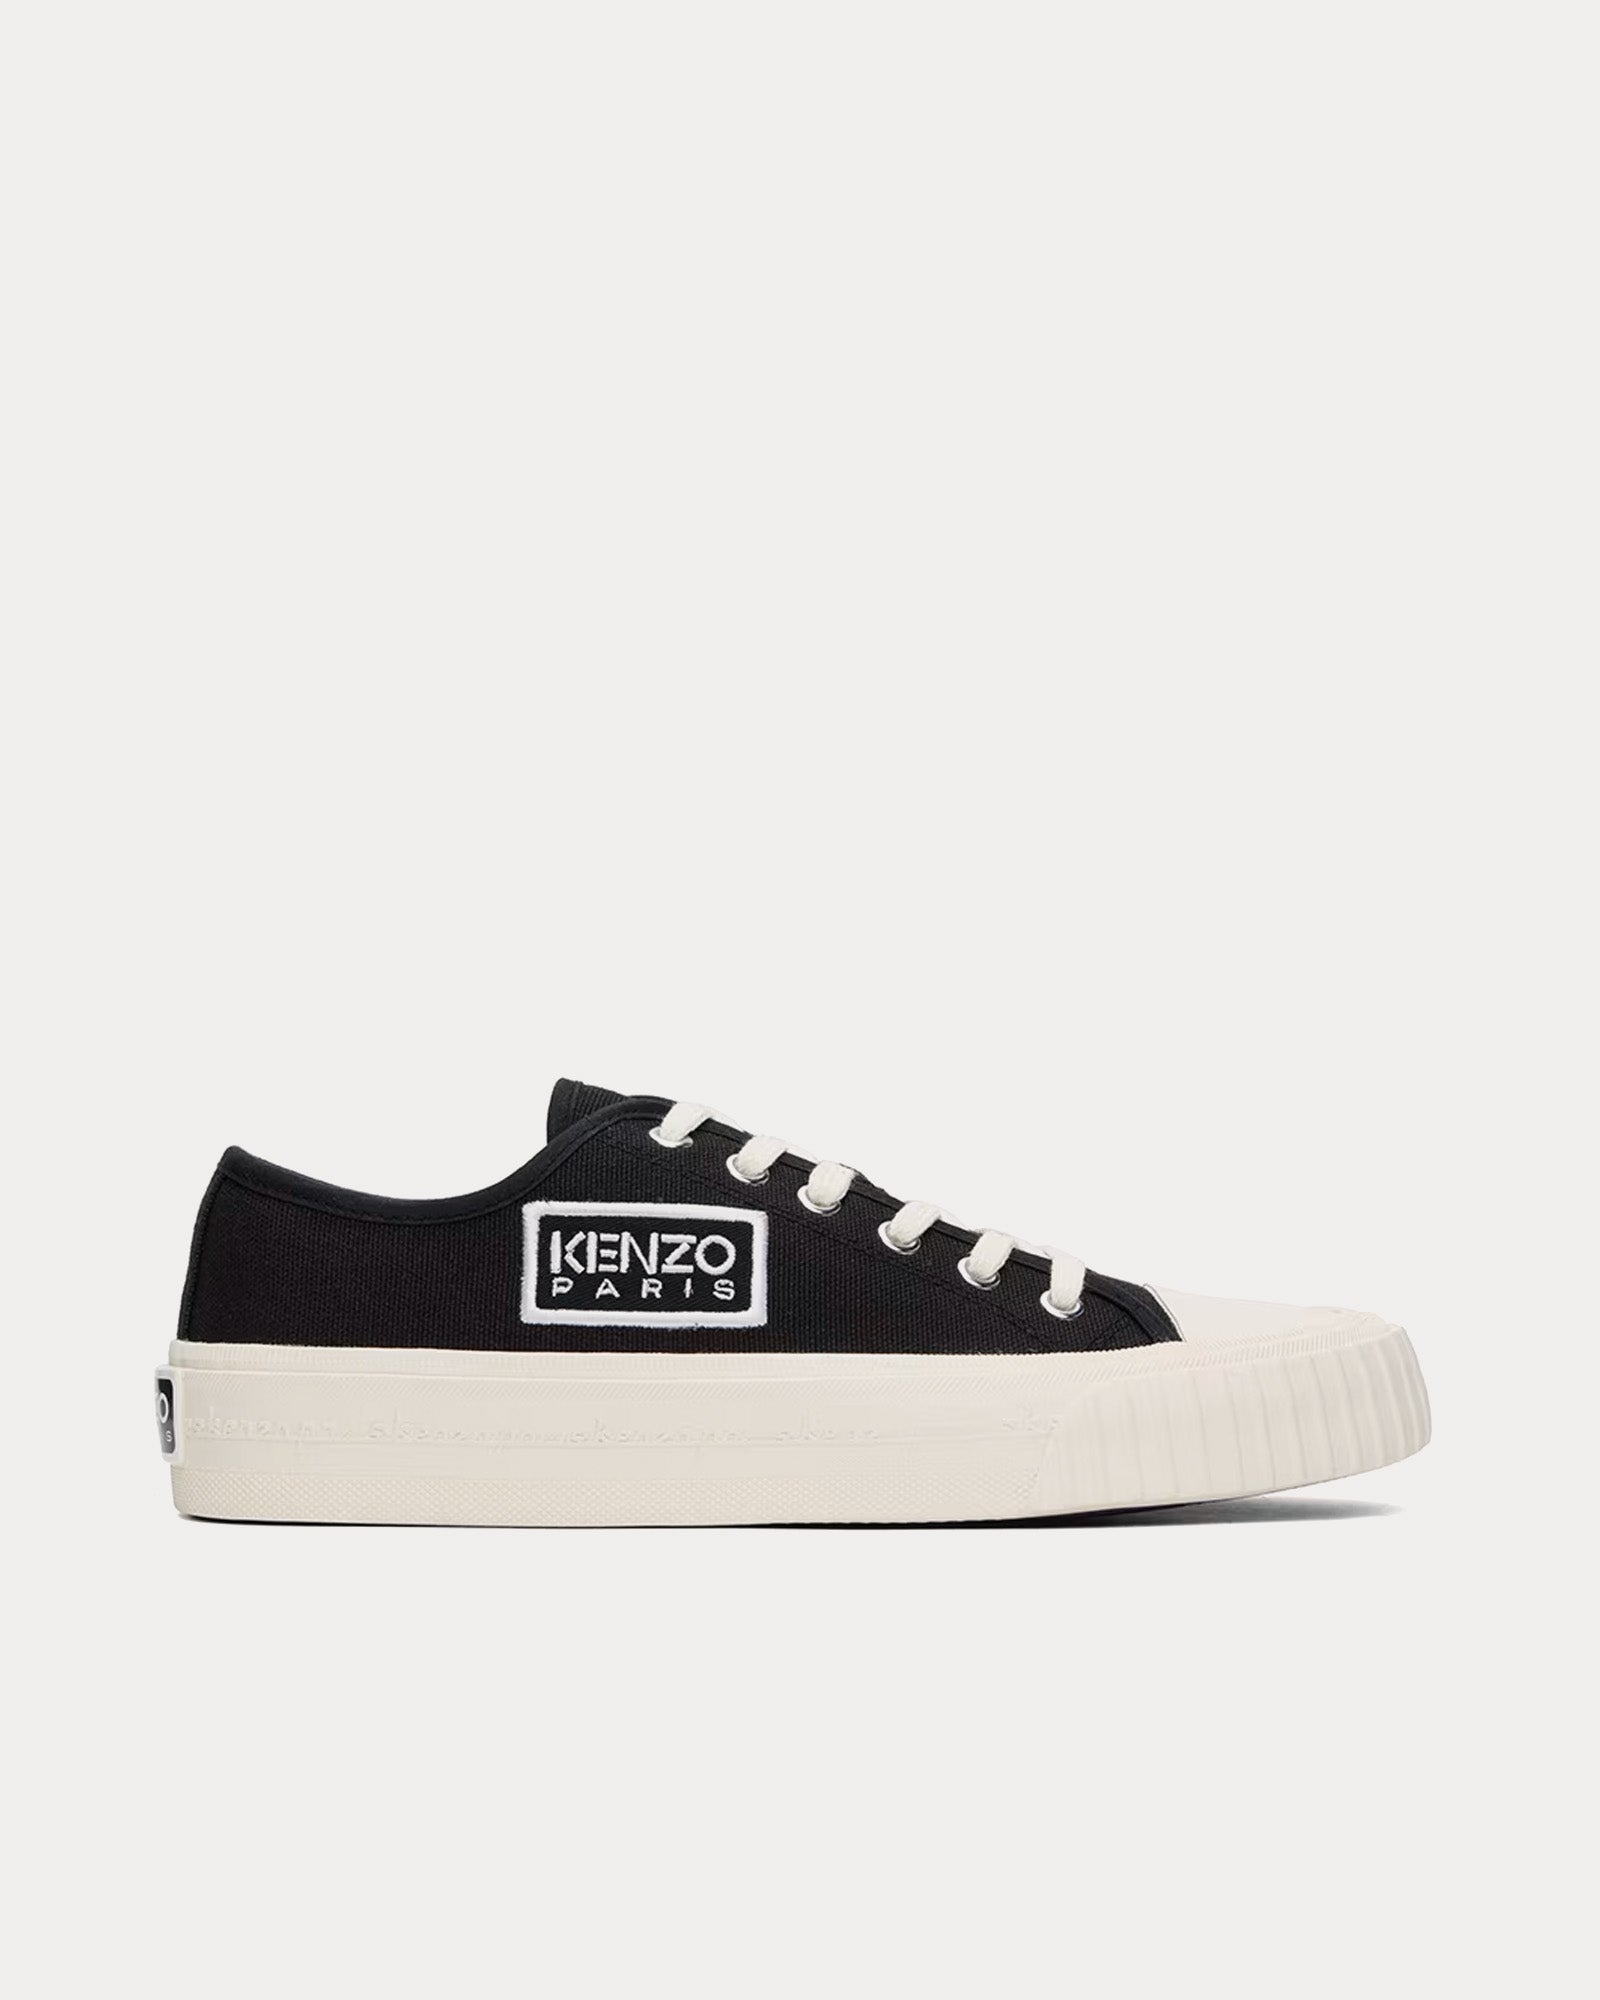 Kenzo - Kenzo Foxy Embroidered Canvas Black Low Top Sneakers